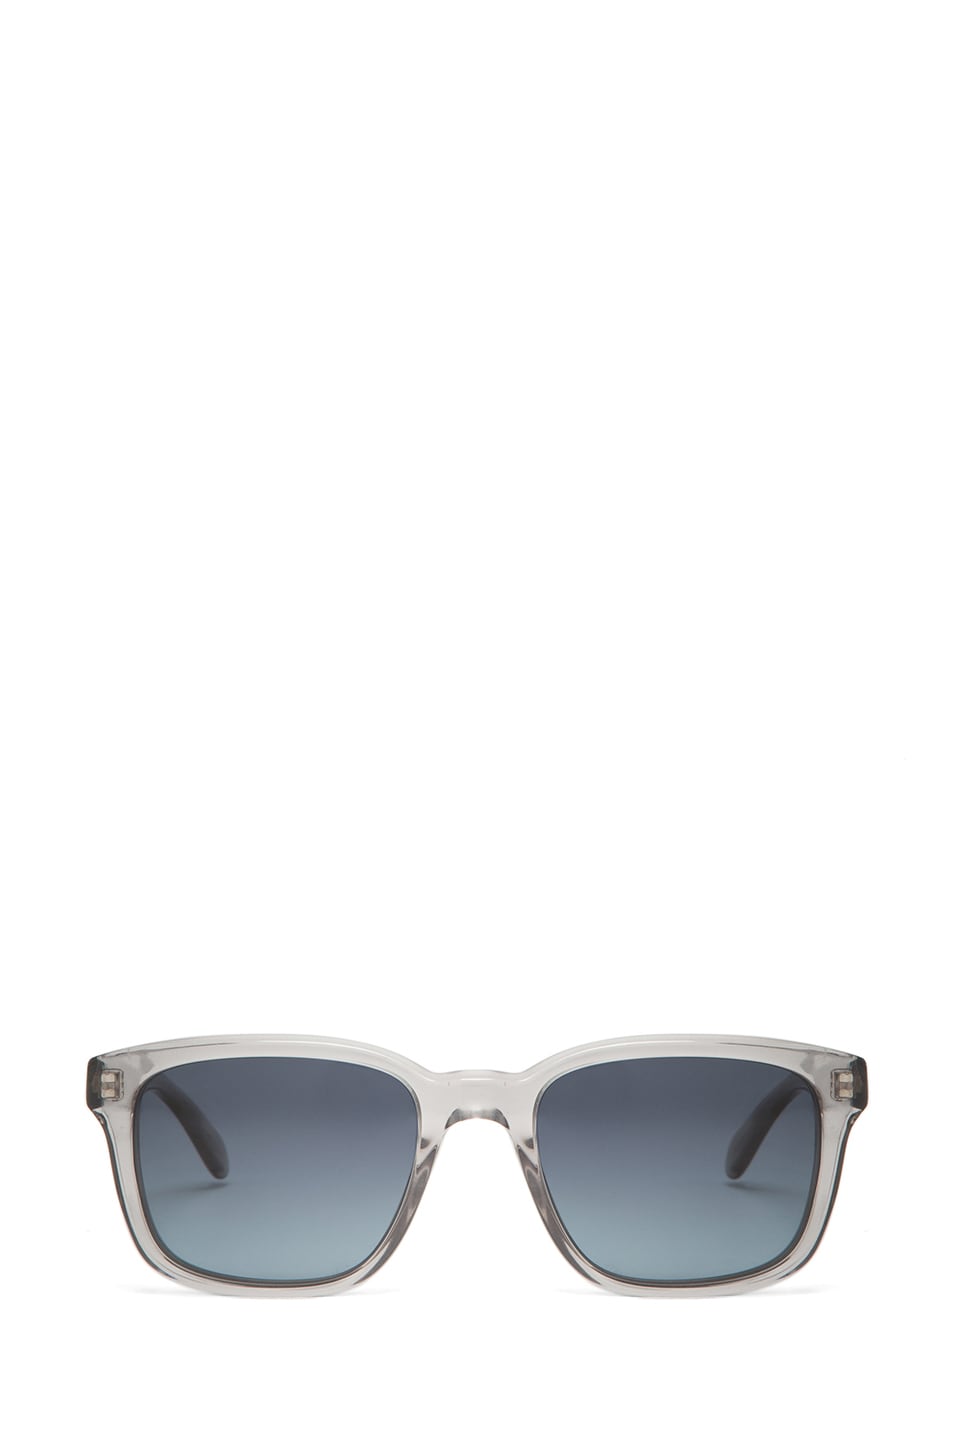 Image 1 of Oliver Peoples Wyler Polarized Sunglasses in Workman Grey